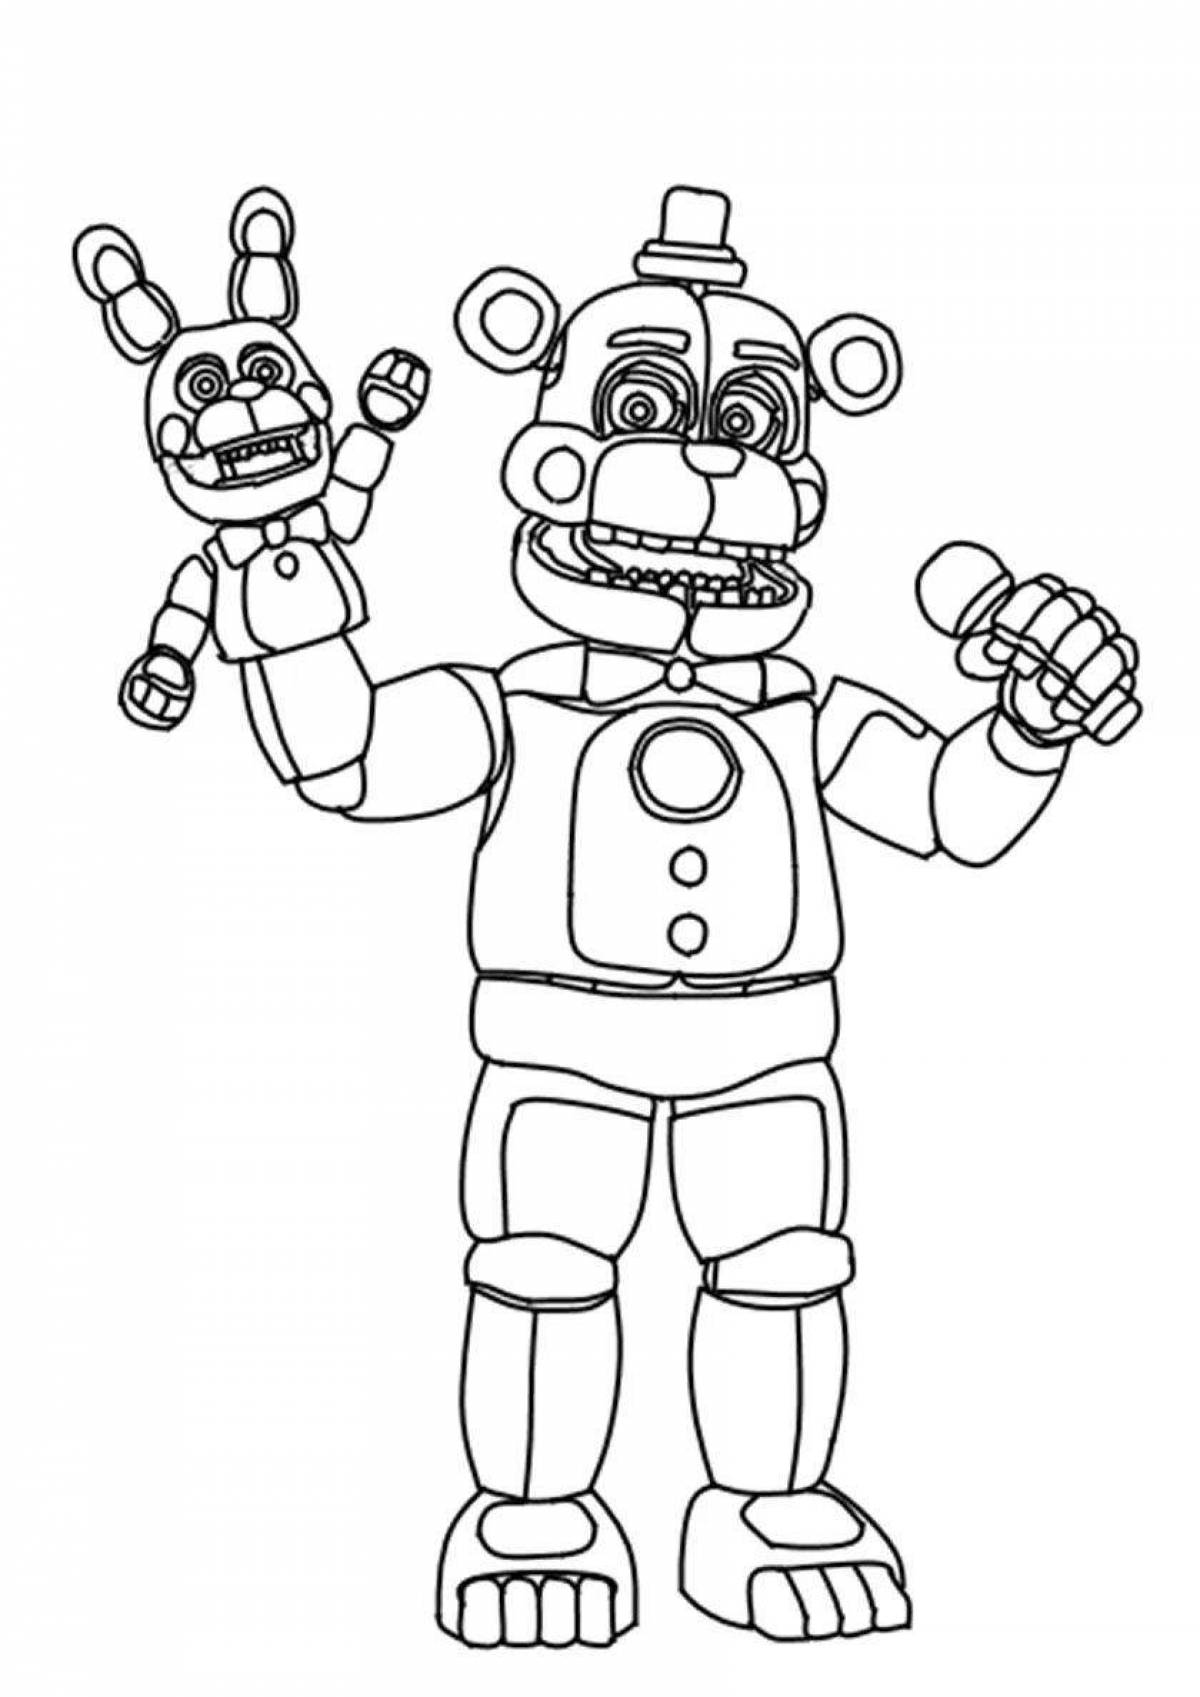 Funny freddy minecraft coloring